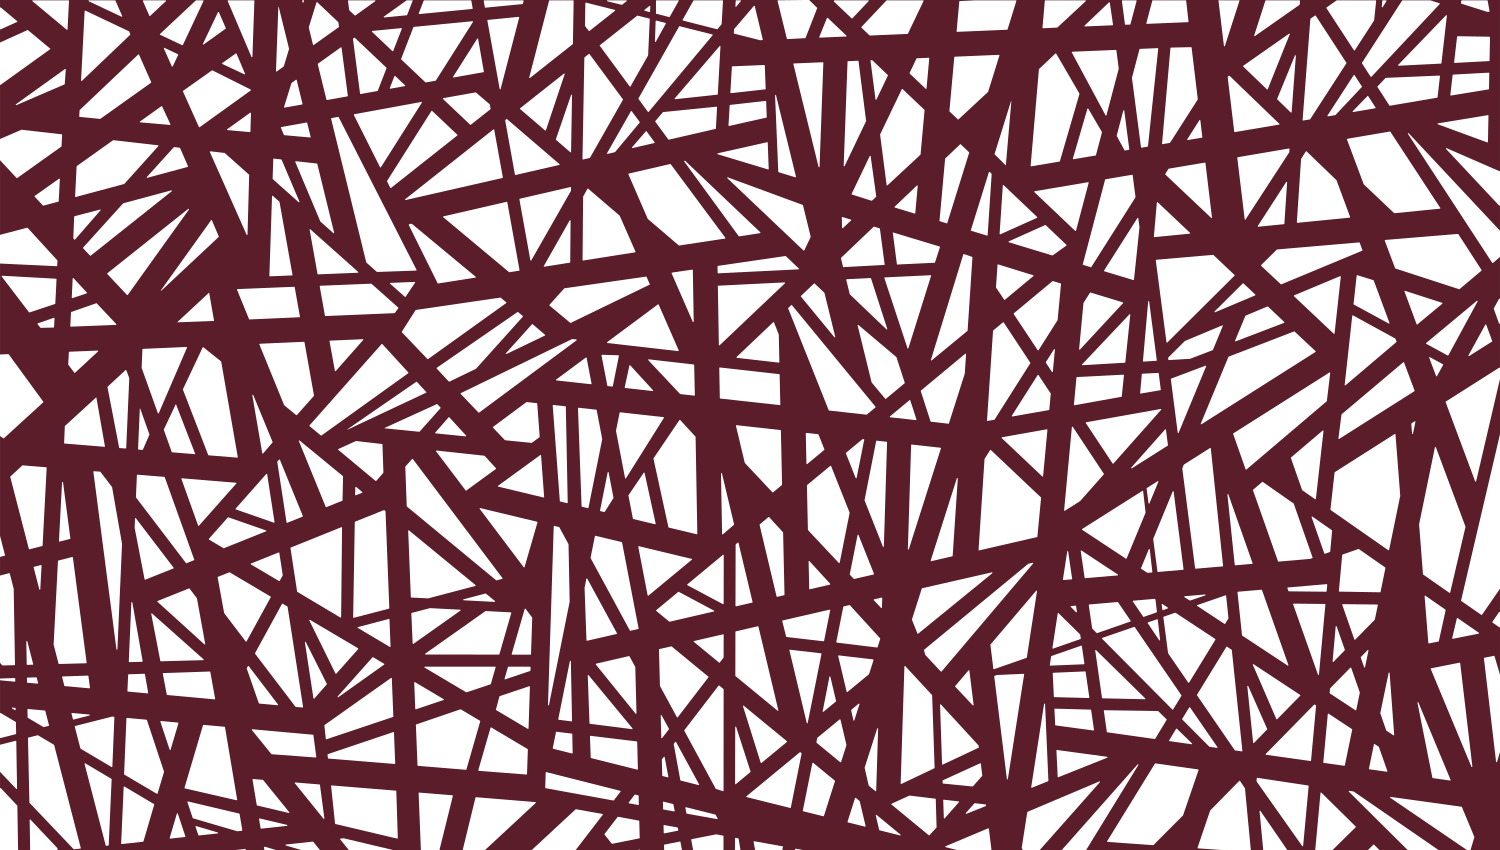 Parasoleil™ Shattered© pattern displayed with a burgundy color overlay